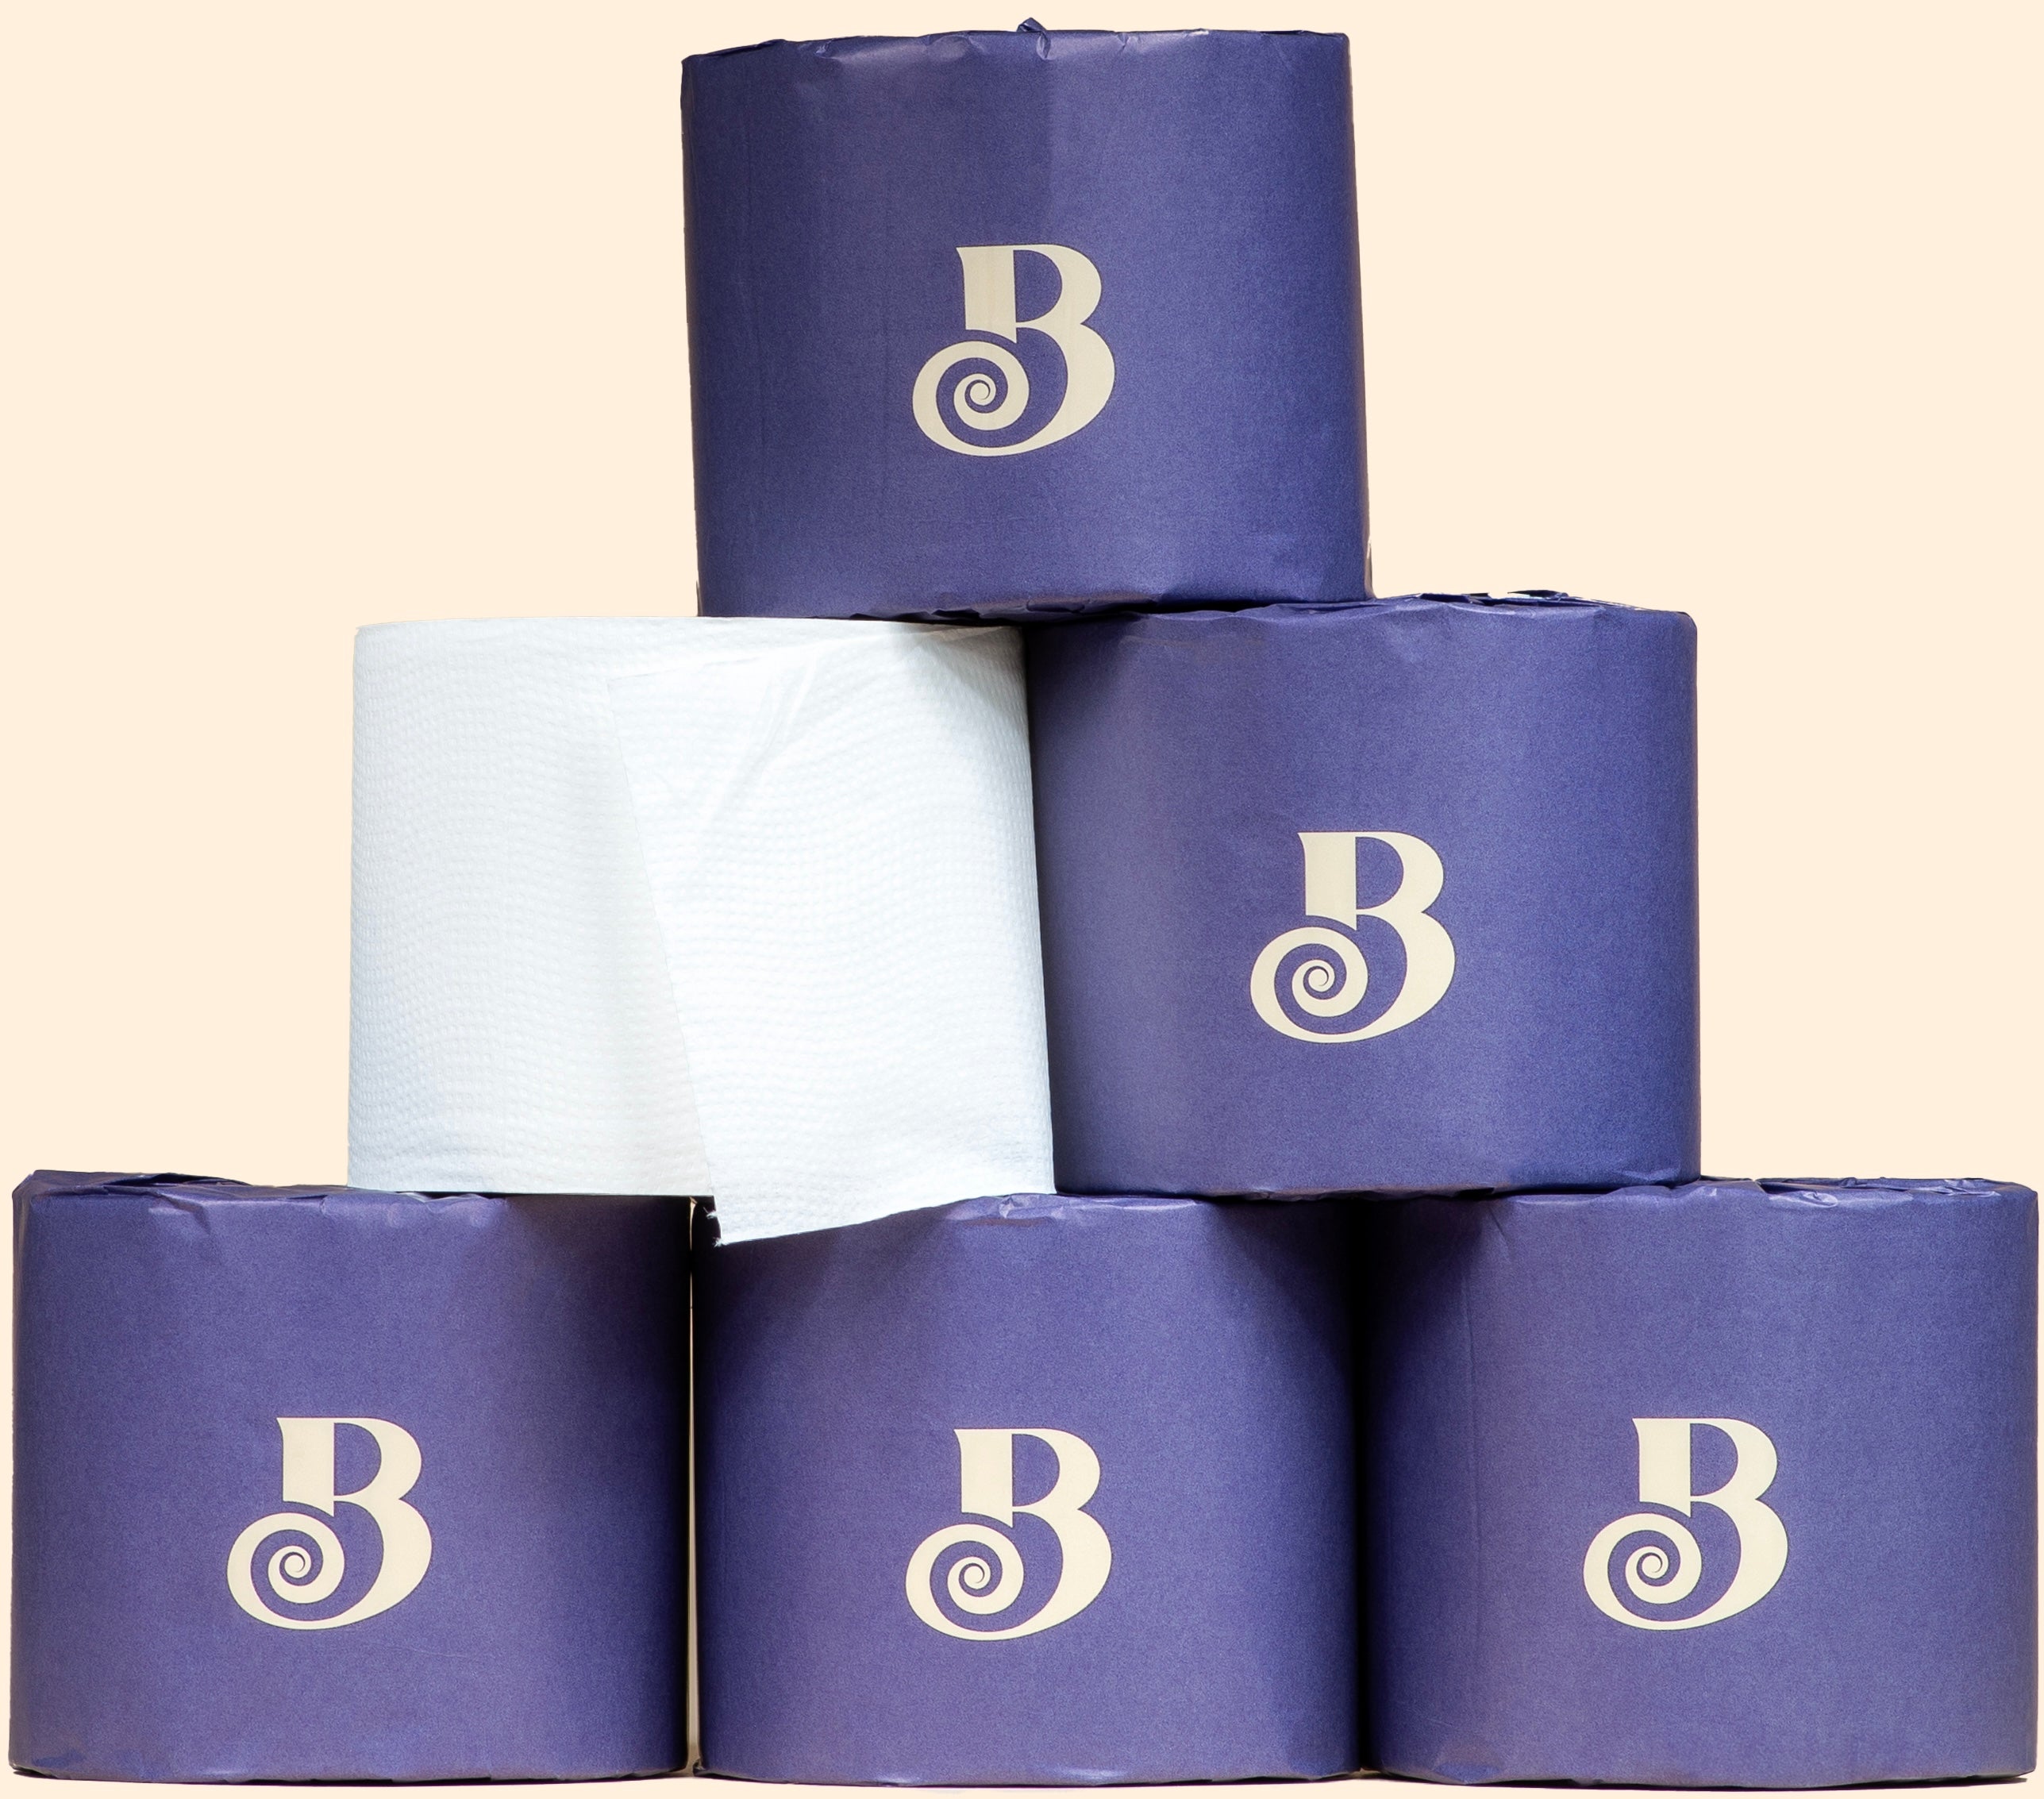 3 Rolls On Average - Bumfy Bamboo Toilet Paper